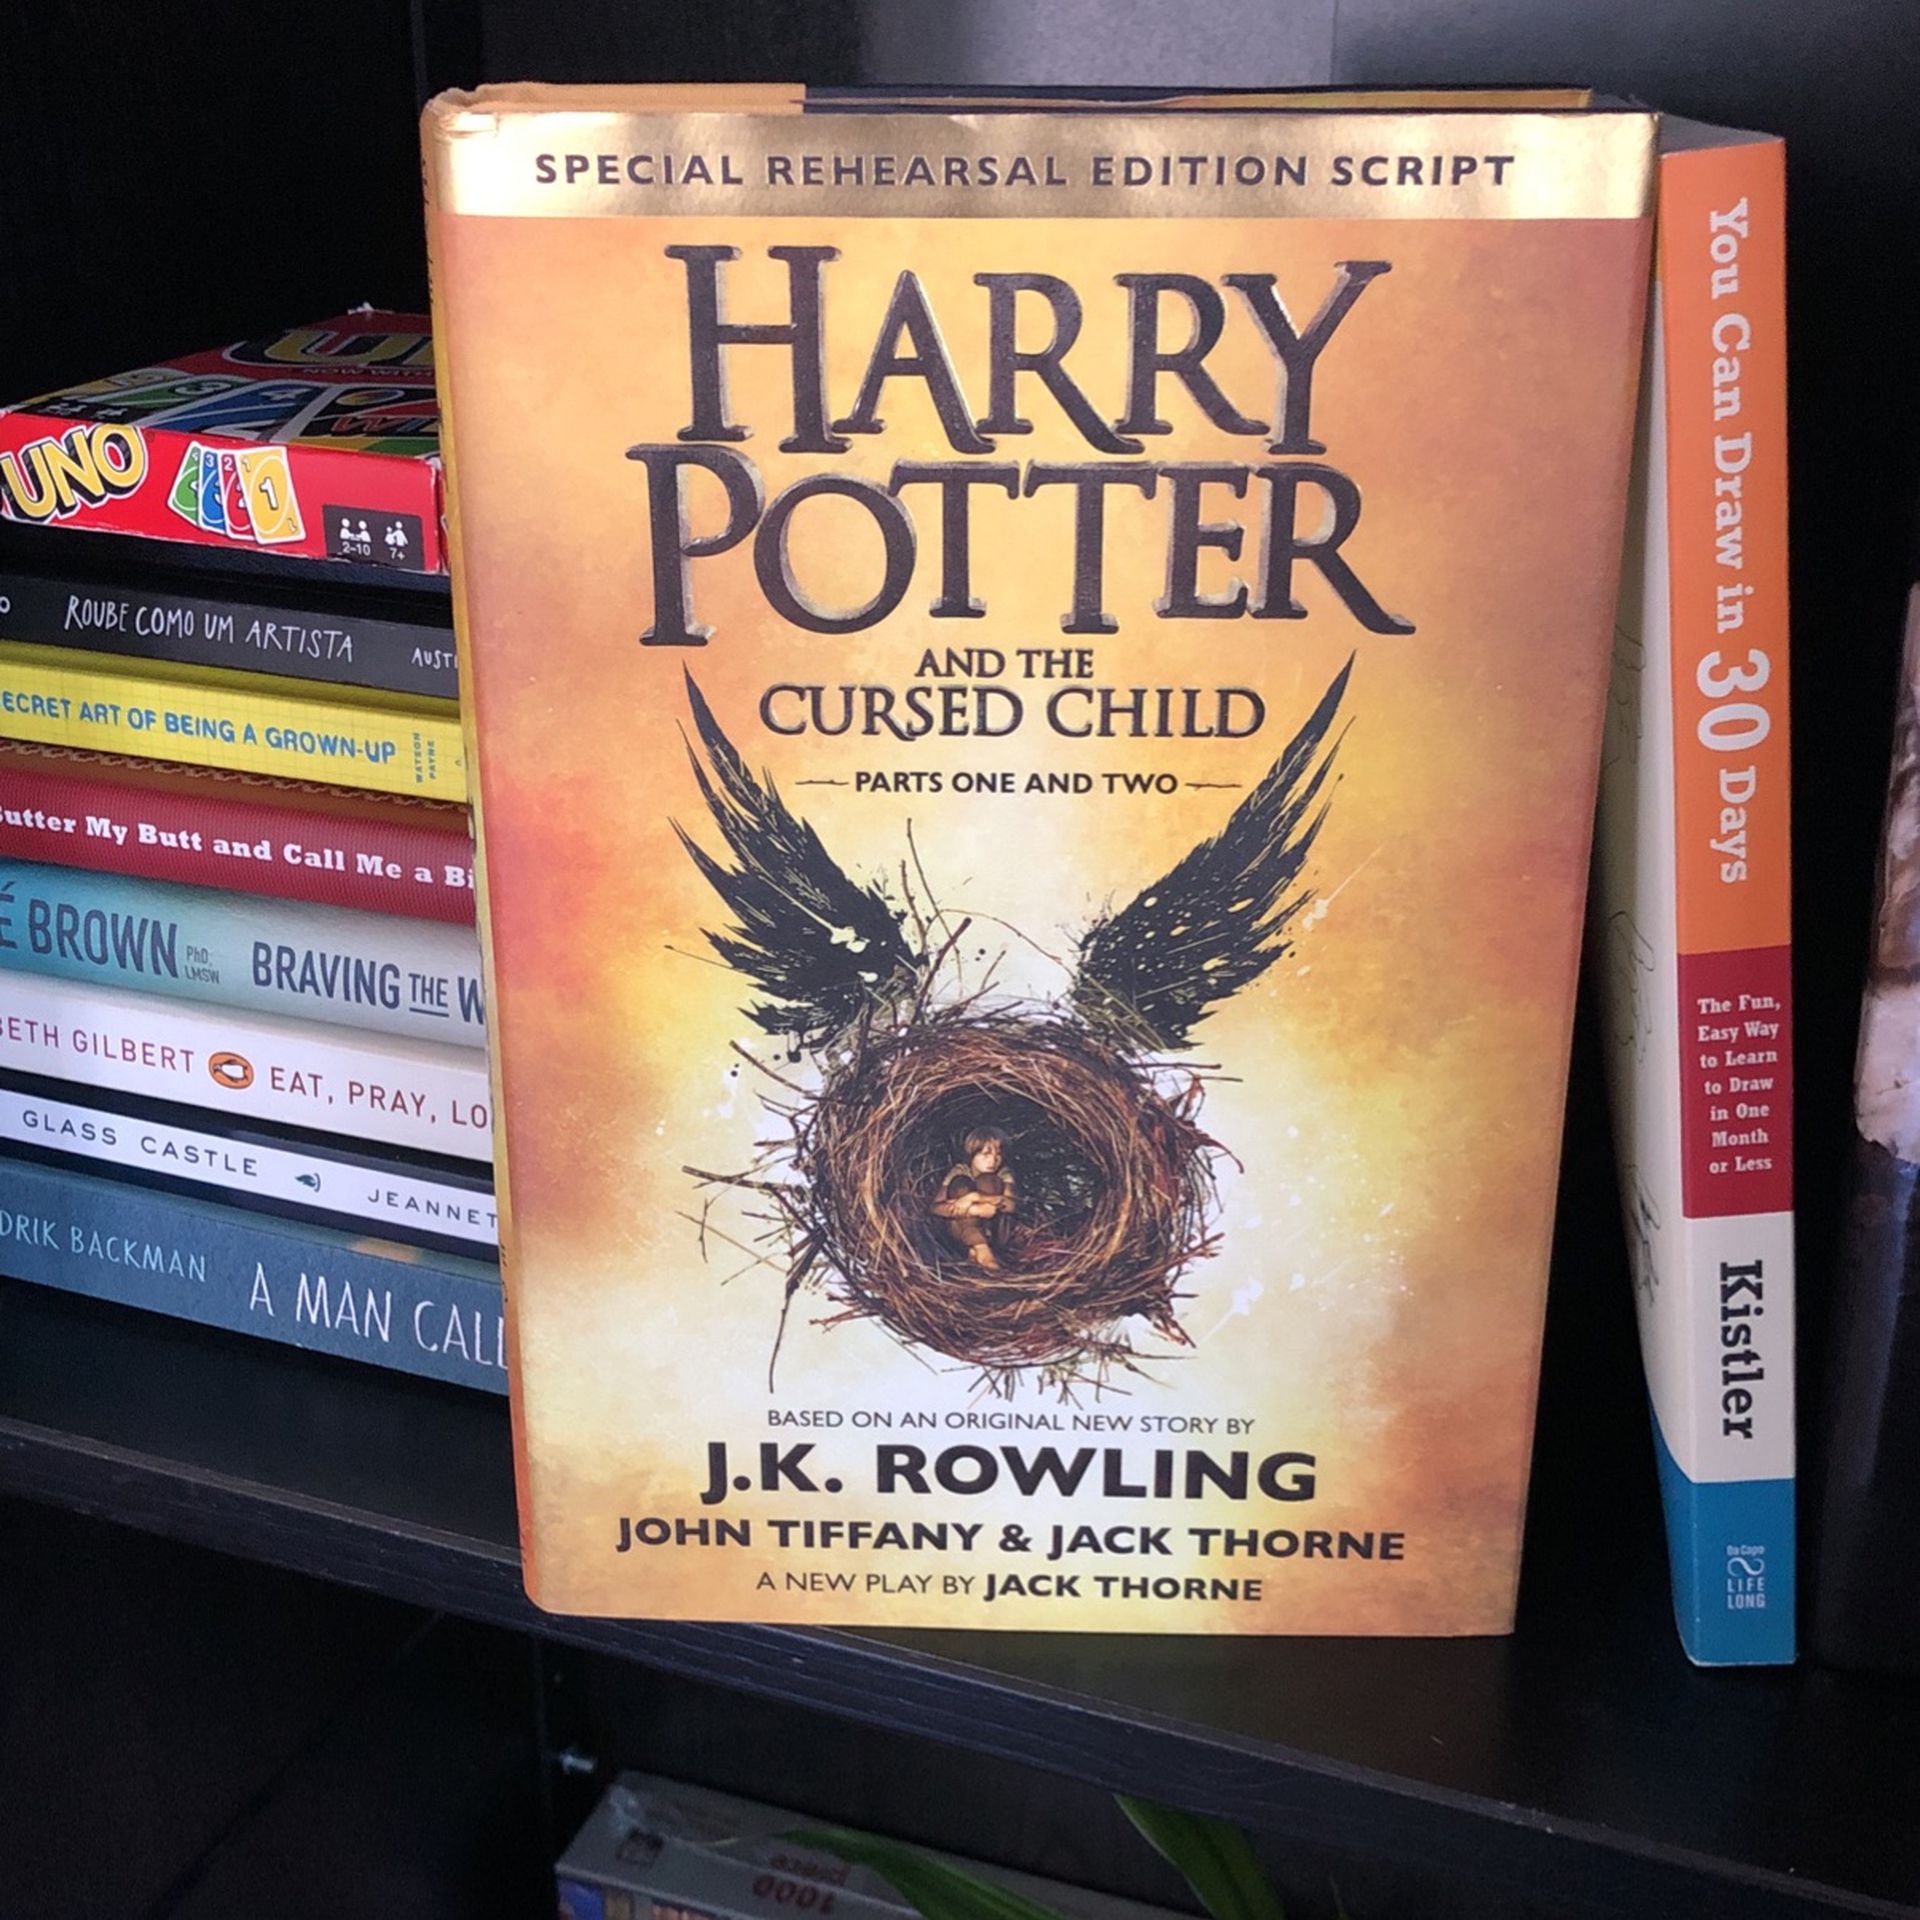 Harry Potter And The Cursed Child - Book Based On J. K. Rowling